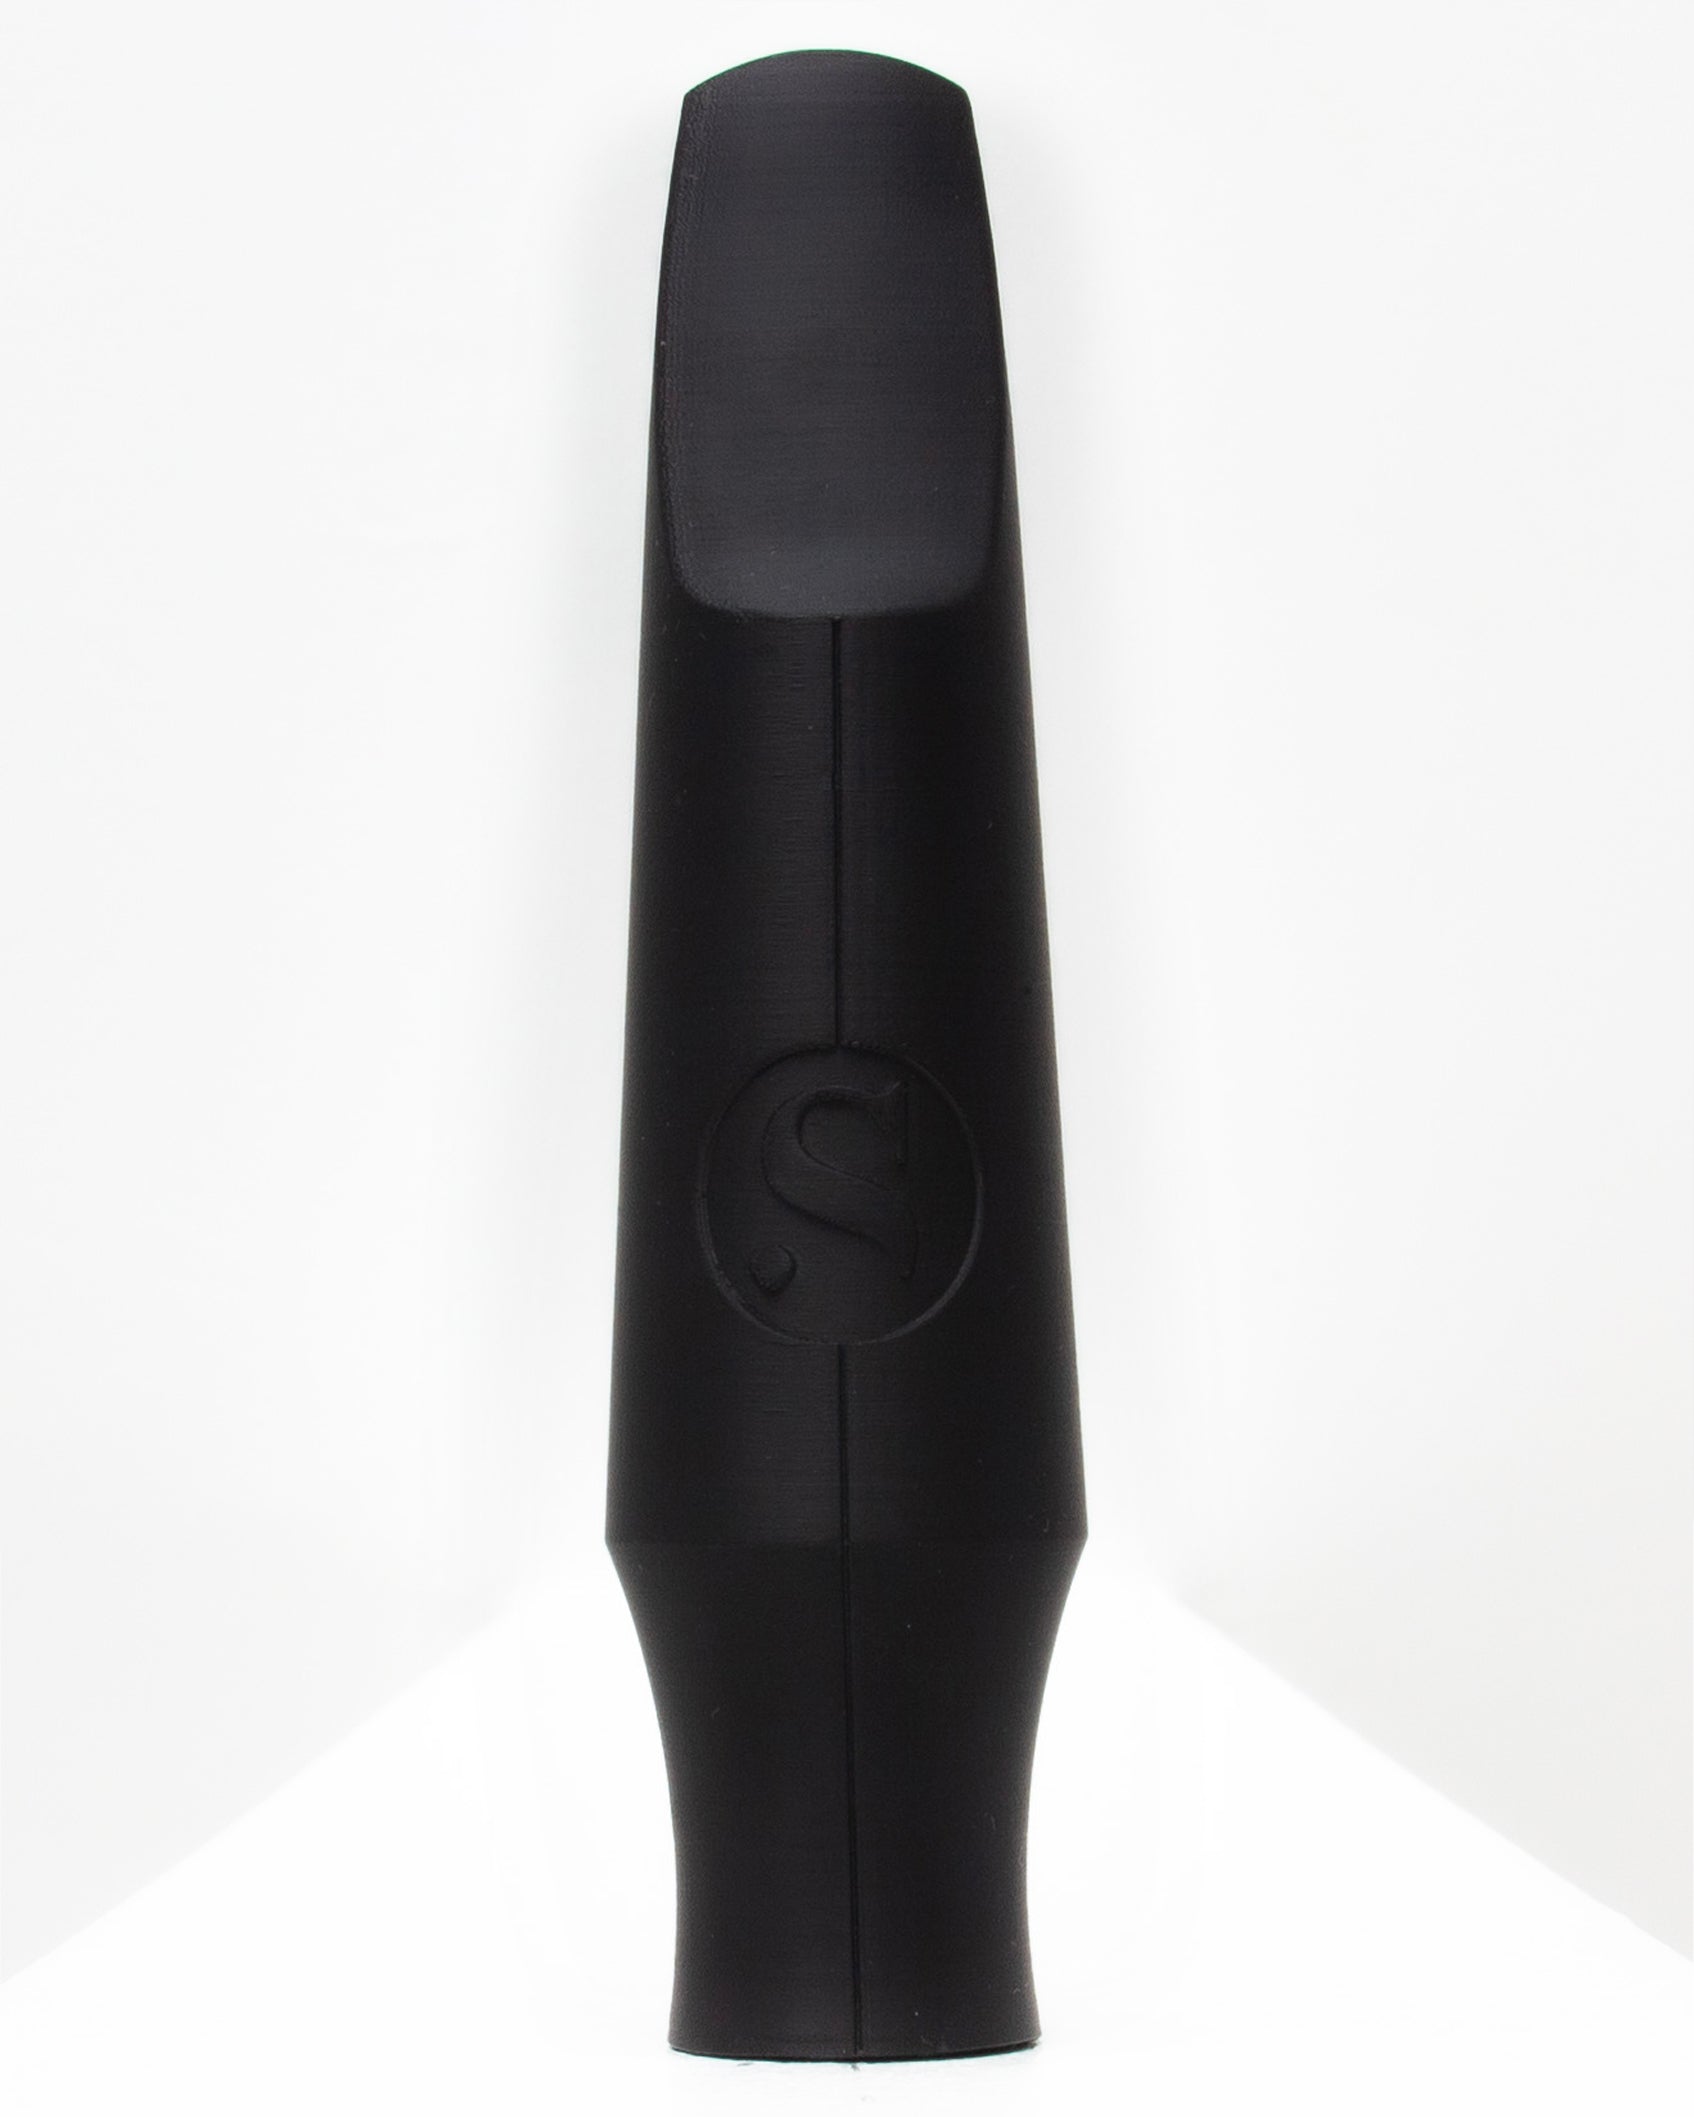 Bass Signature Saxophone mouthpiece - Michael Wilbur by Syos - 9 / Pitch Black